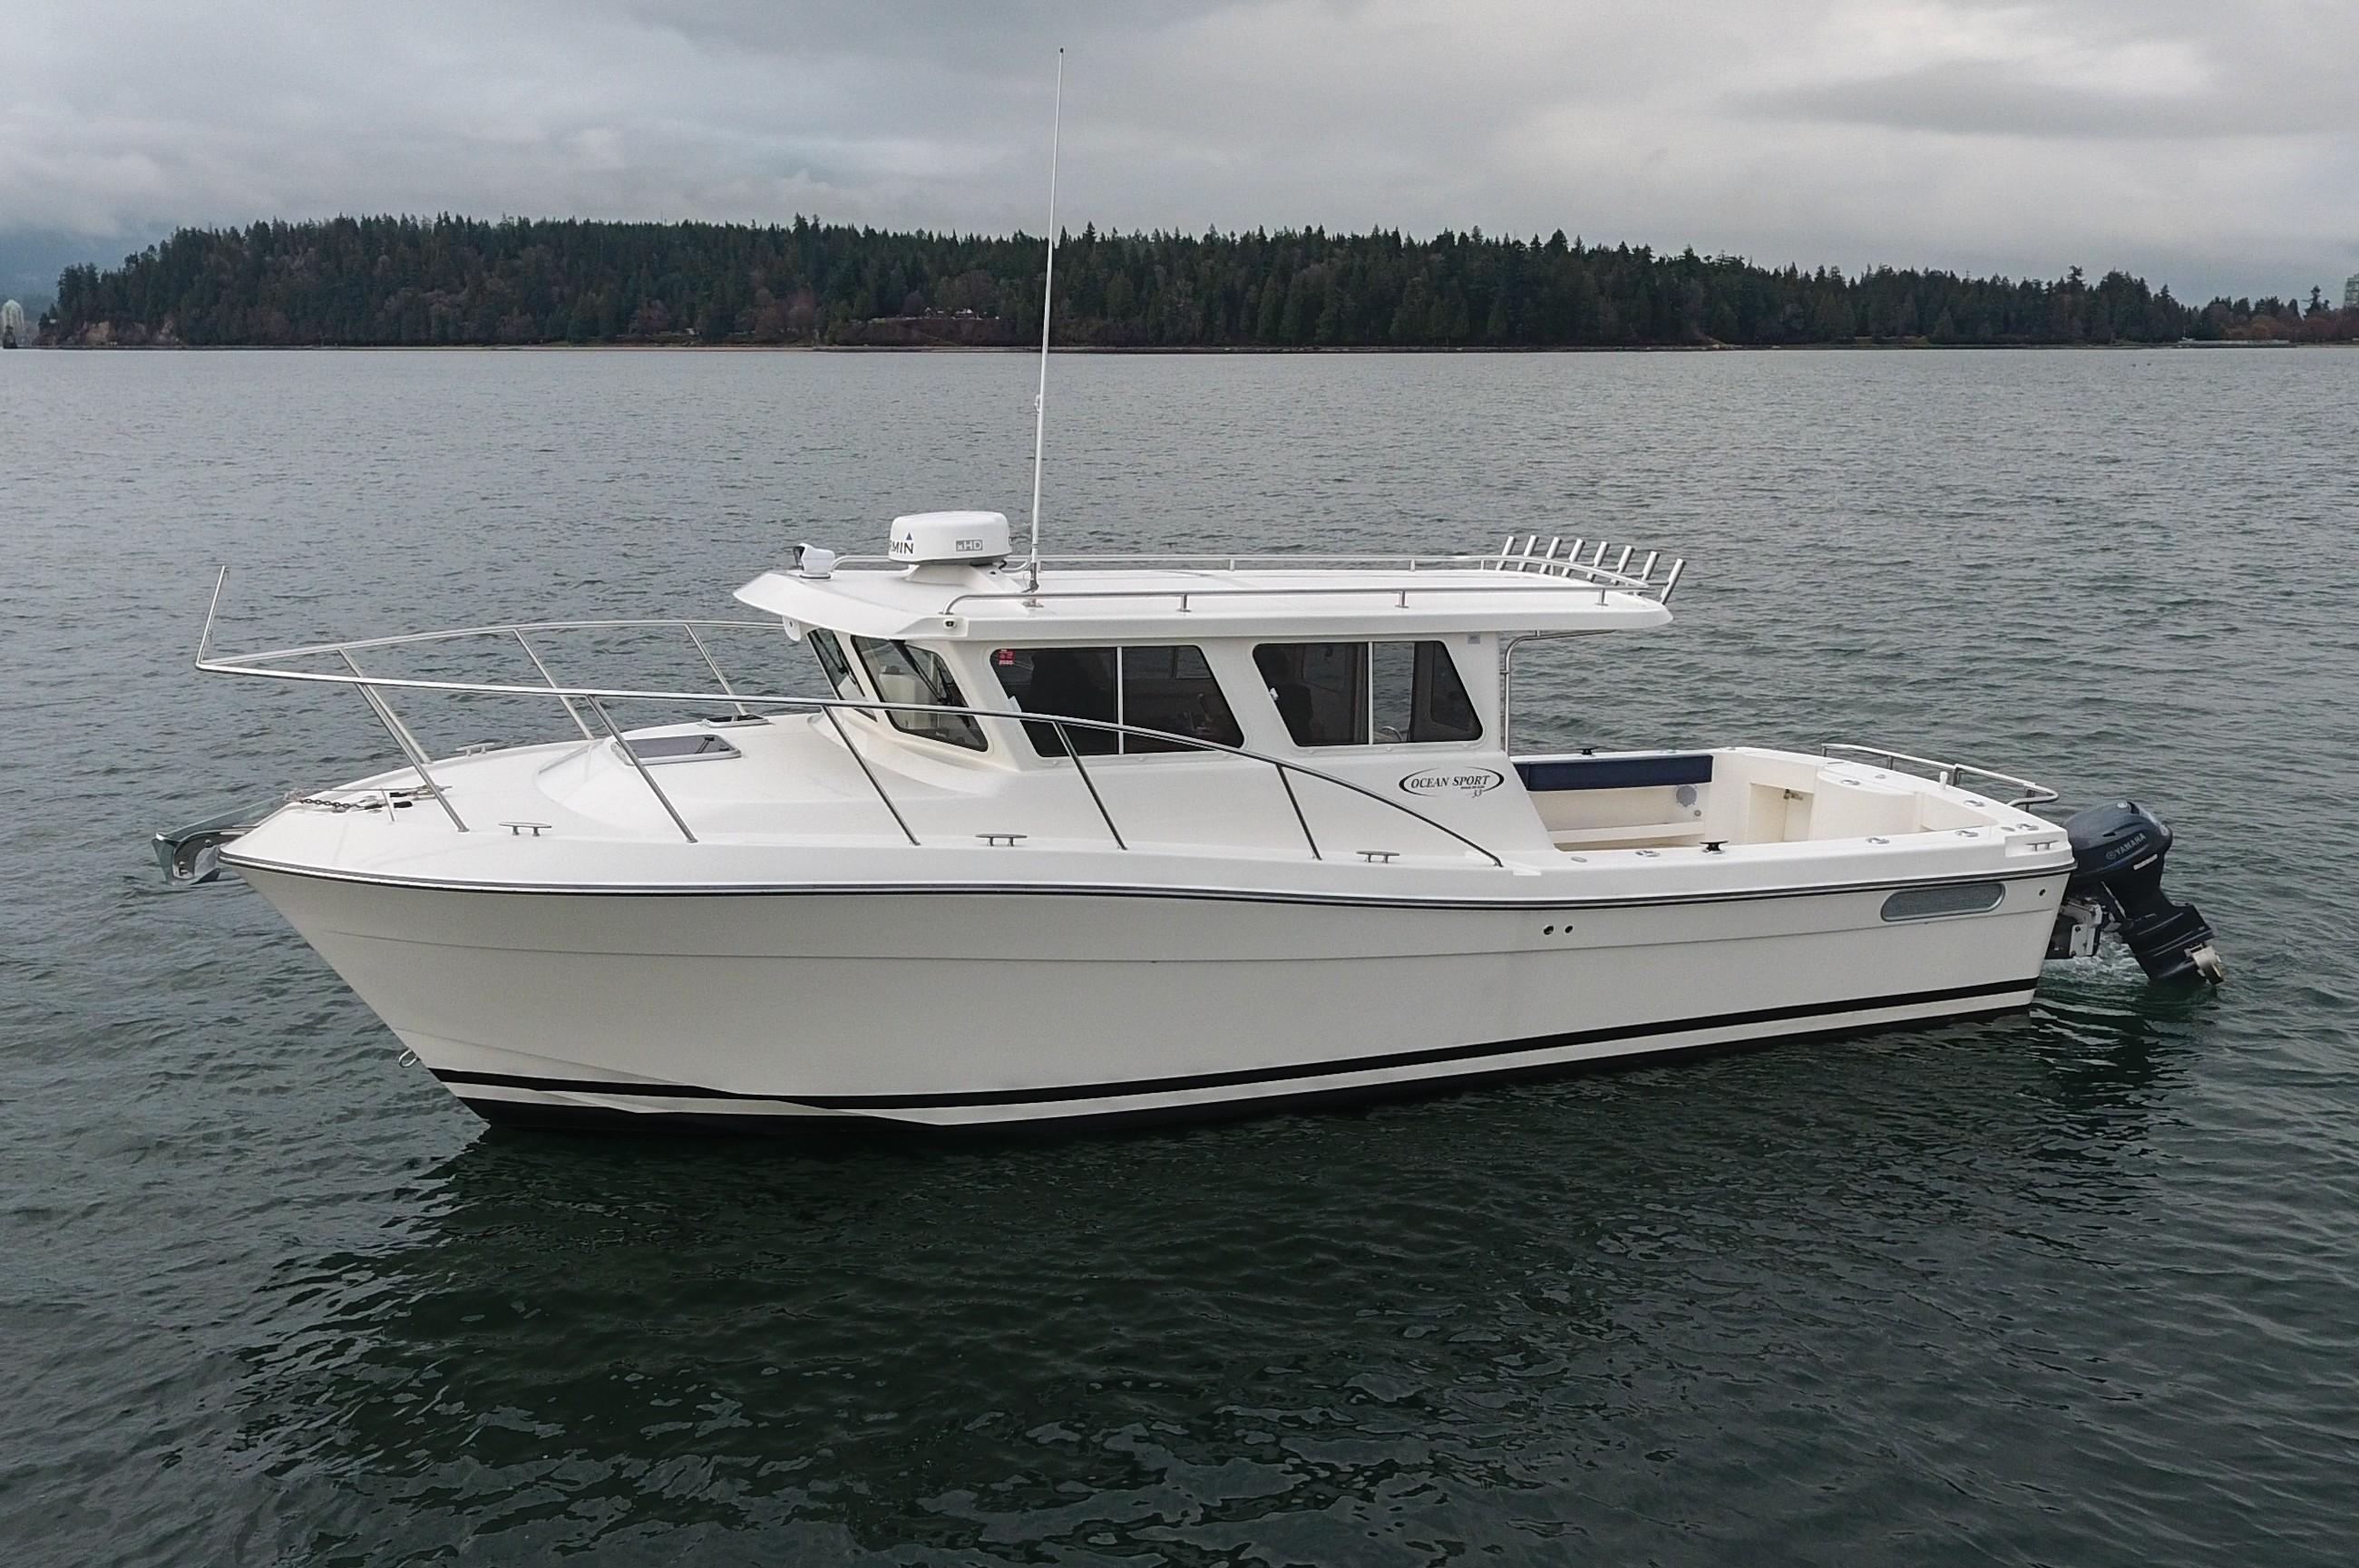 Yacht for Sale | 33 Ocean Sport Yachts Vancouver, Canada | Denison